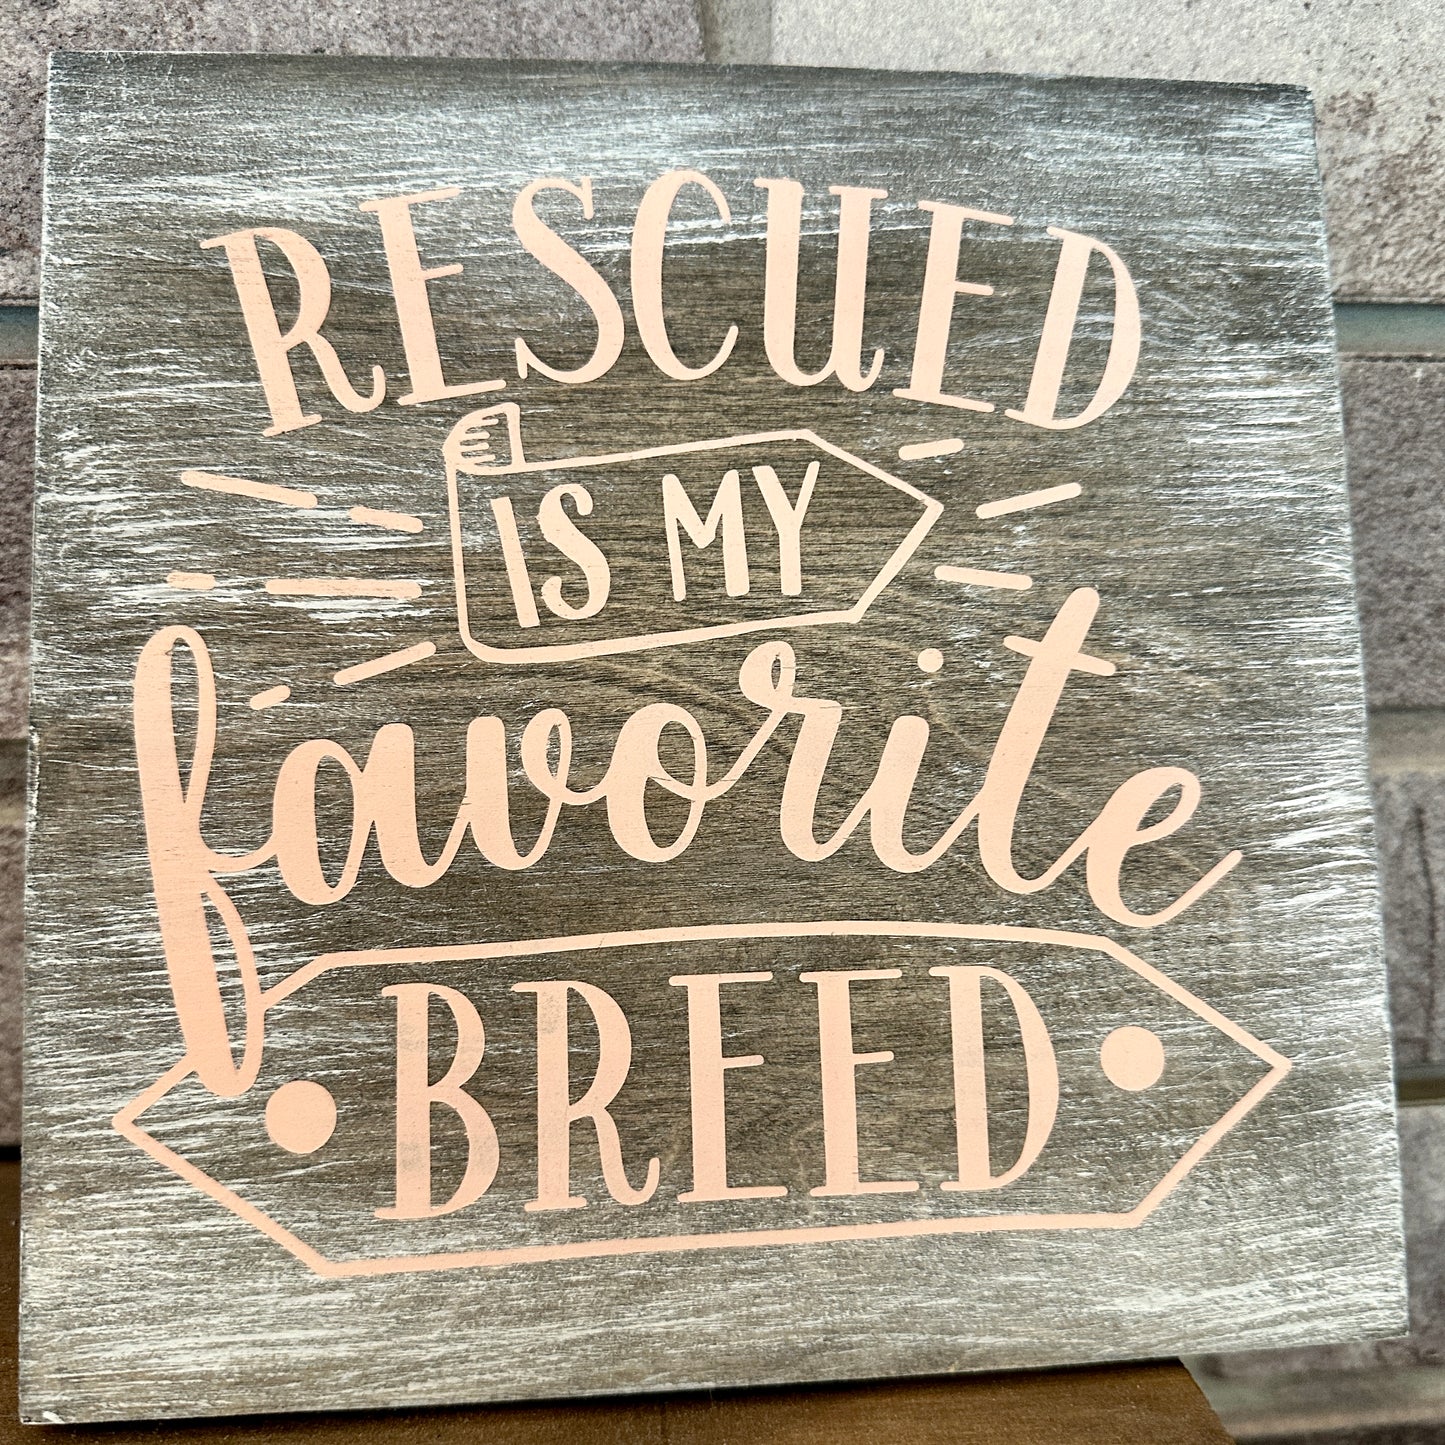 Rescued Is My Favorite Breed: MINI DESIGN - Paisley Grace Makery